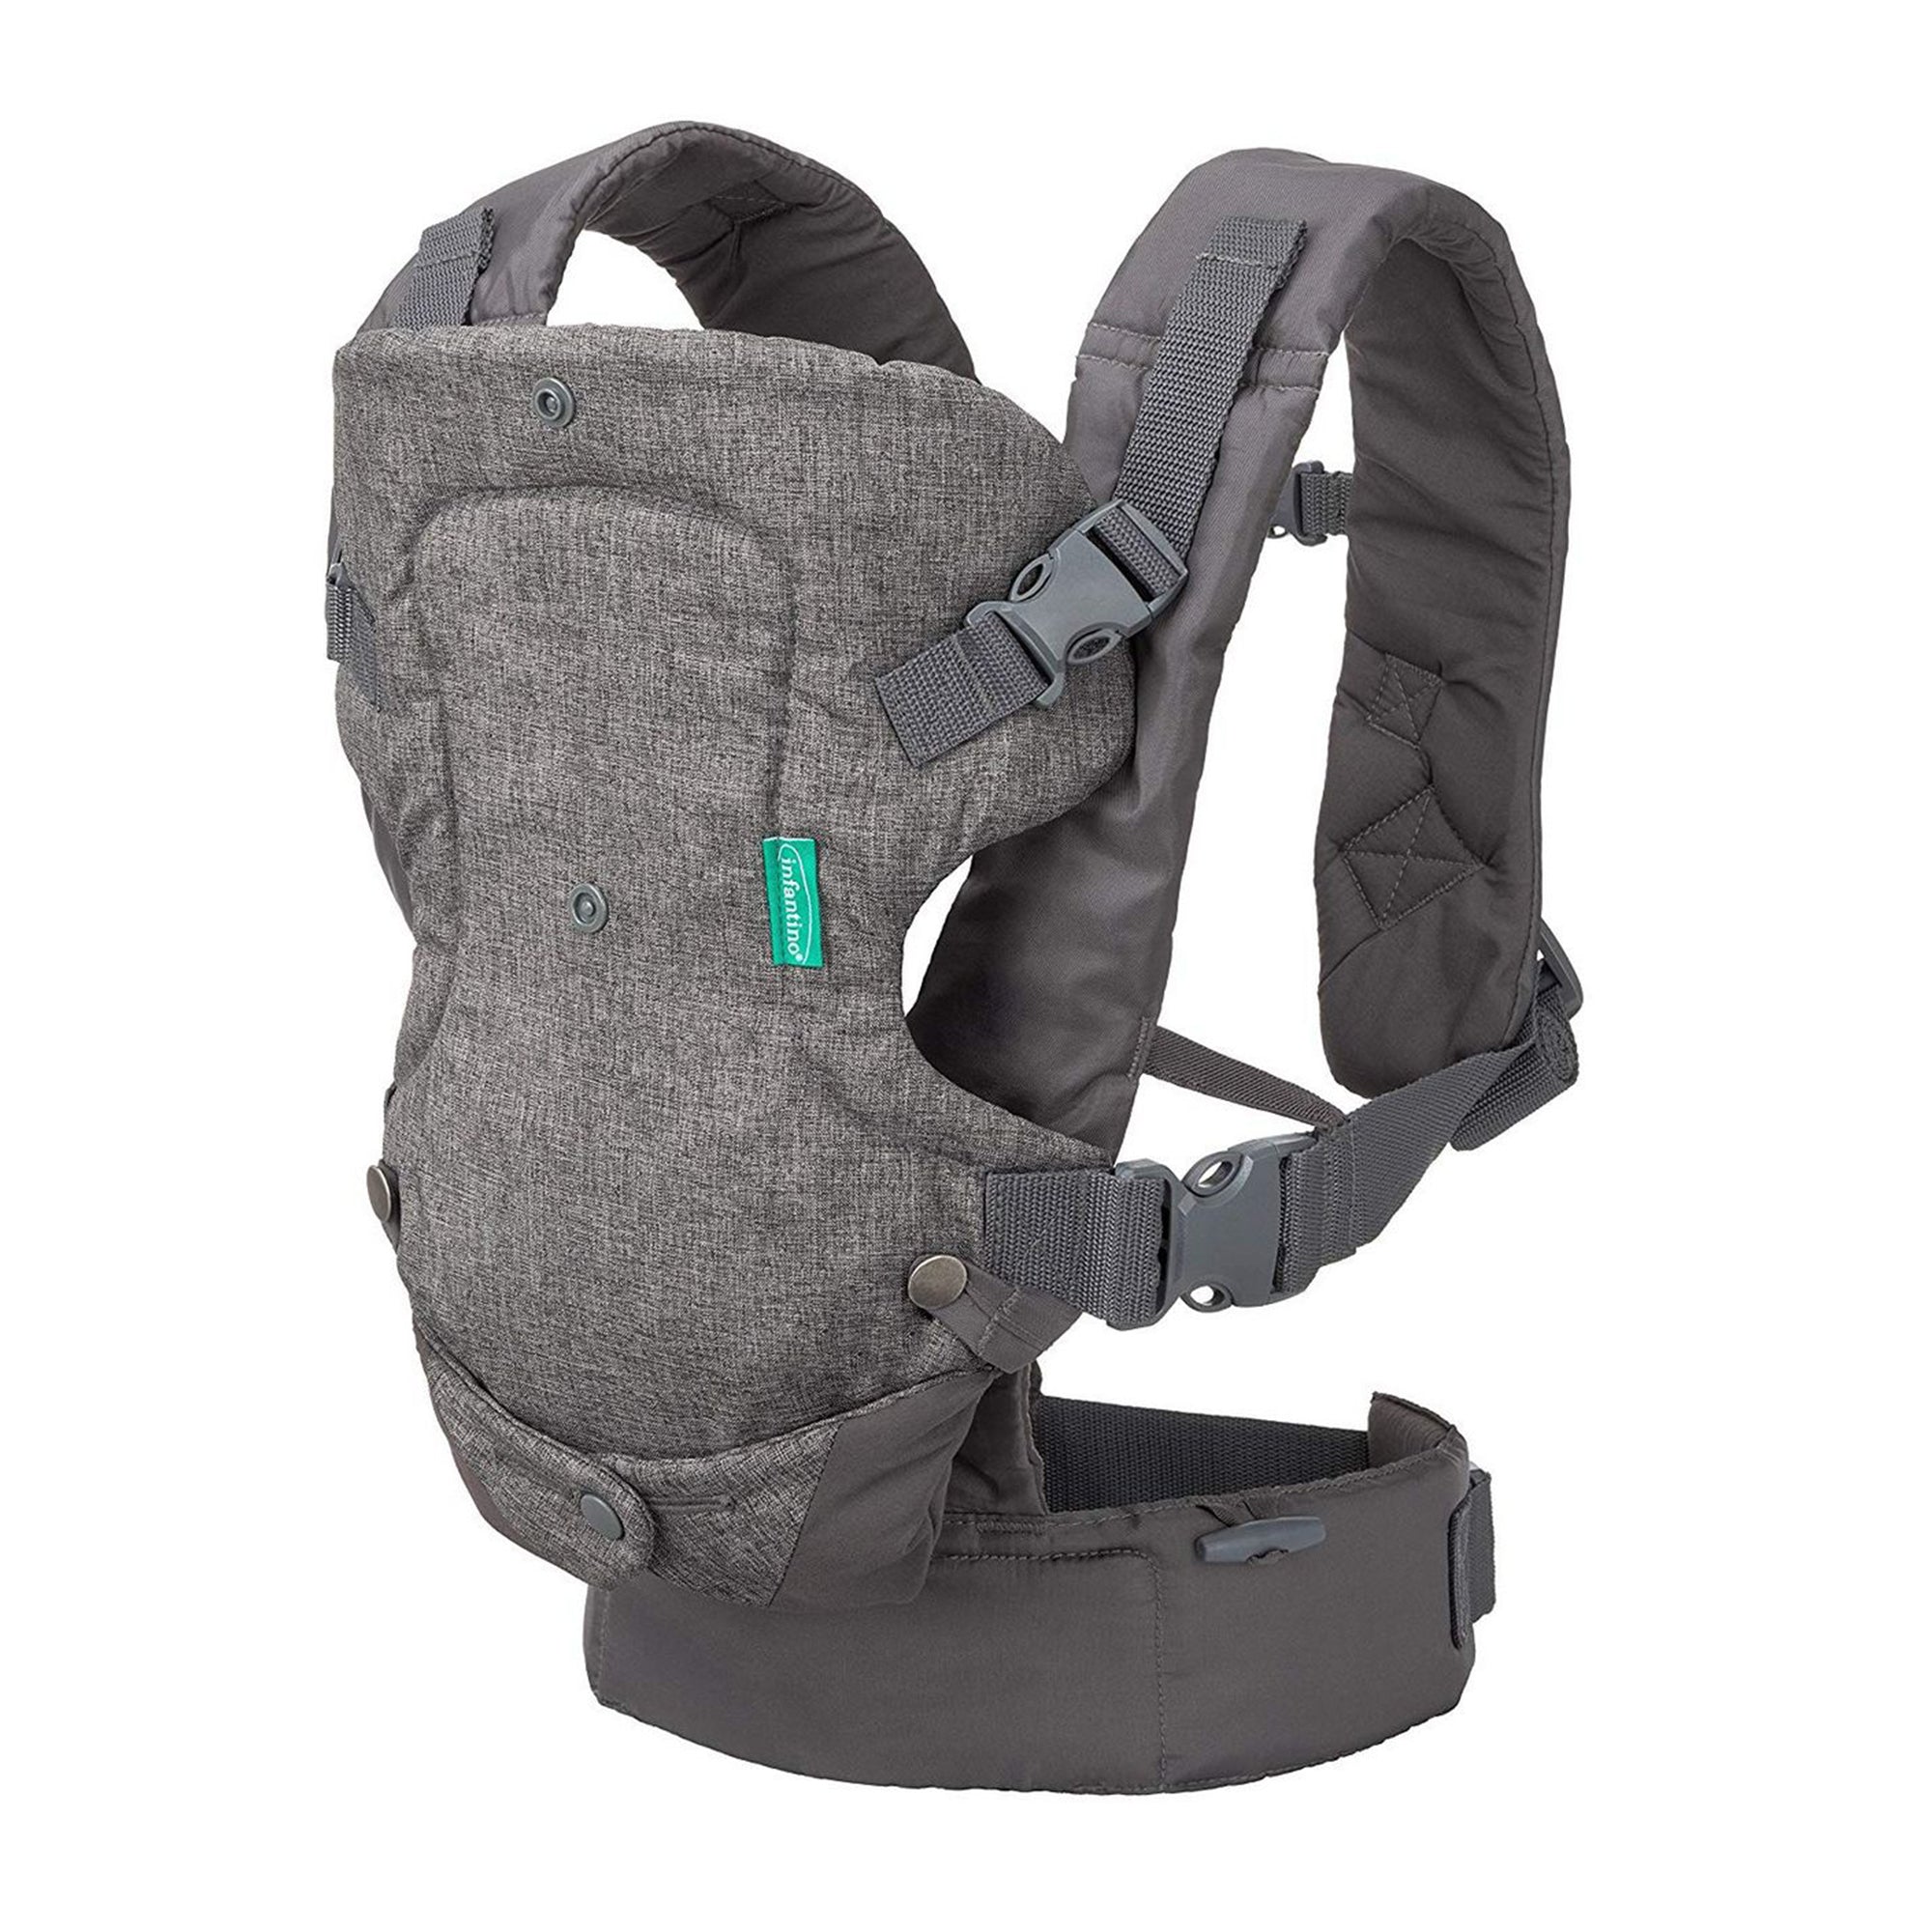 Infantino Flip 4-In-1 Convertible Carrier - Birth to 36 Months